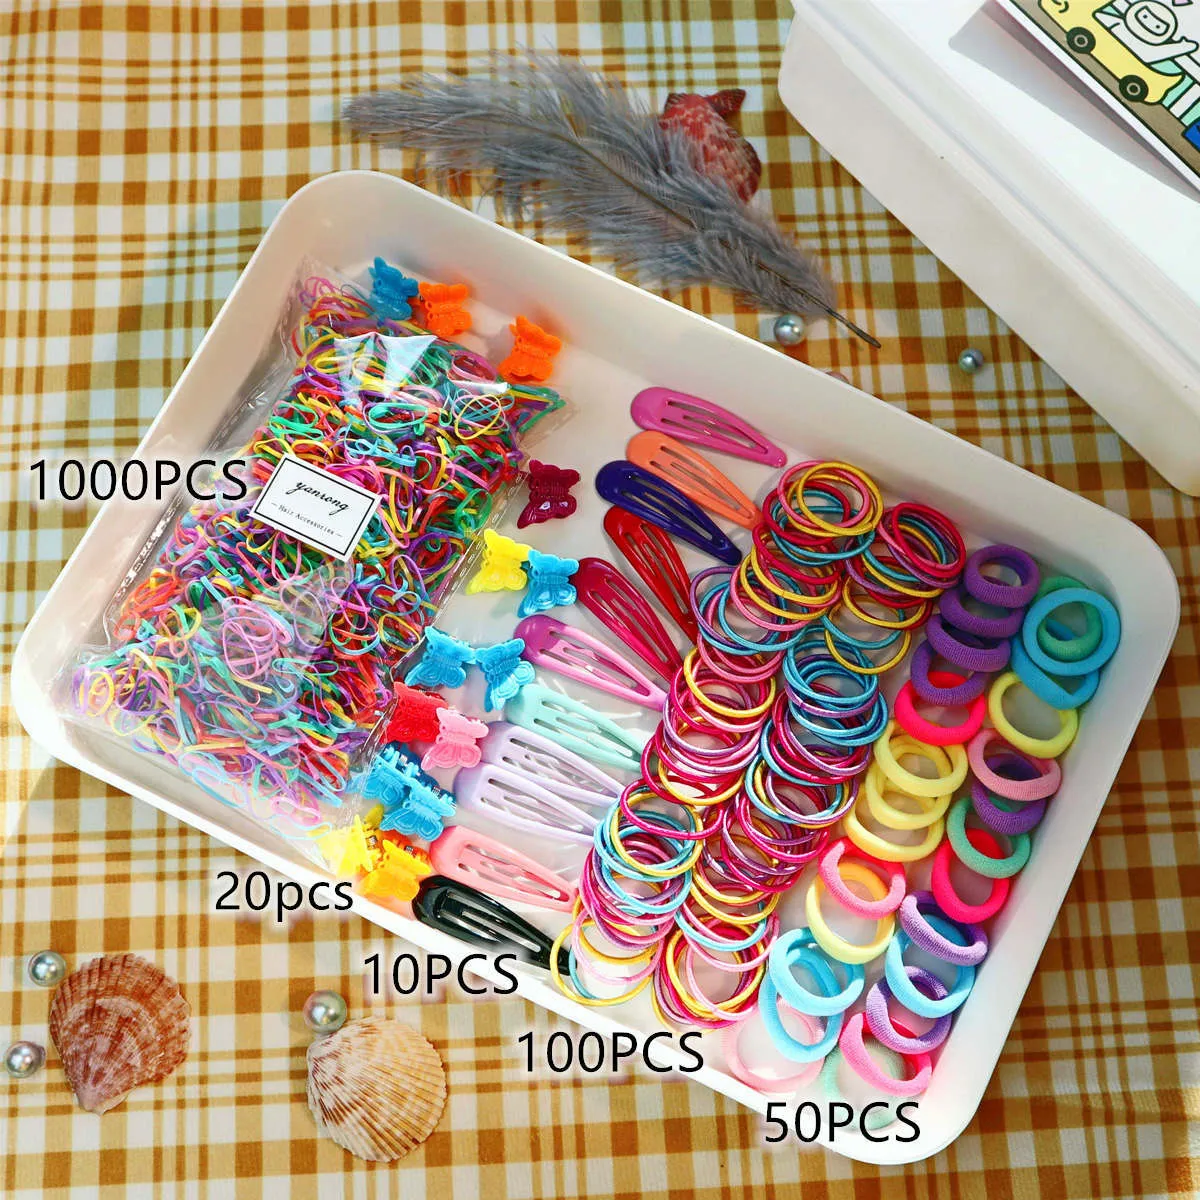 1180-pack Multi-Style Hair Ties and Hair Clips Hair Accessory Sets for Girls  big image 1